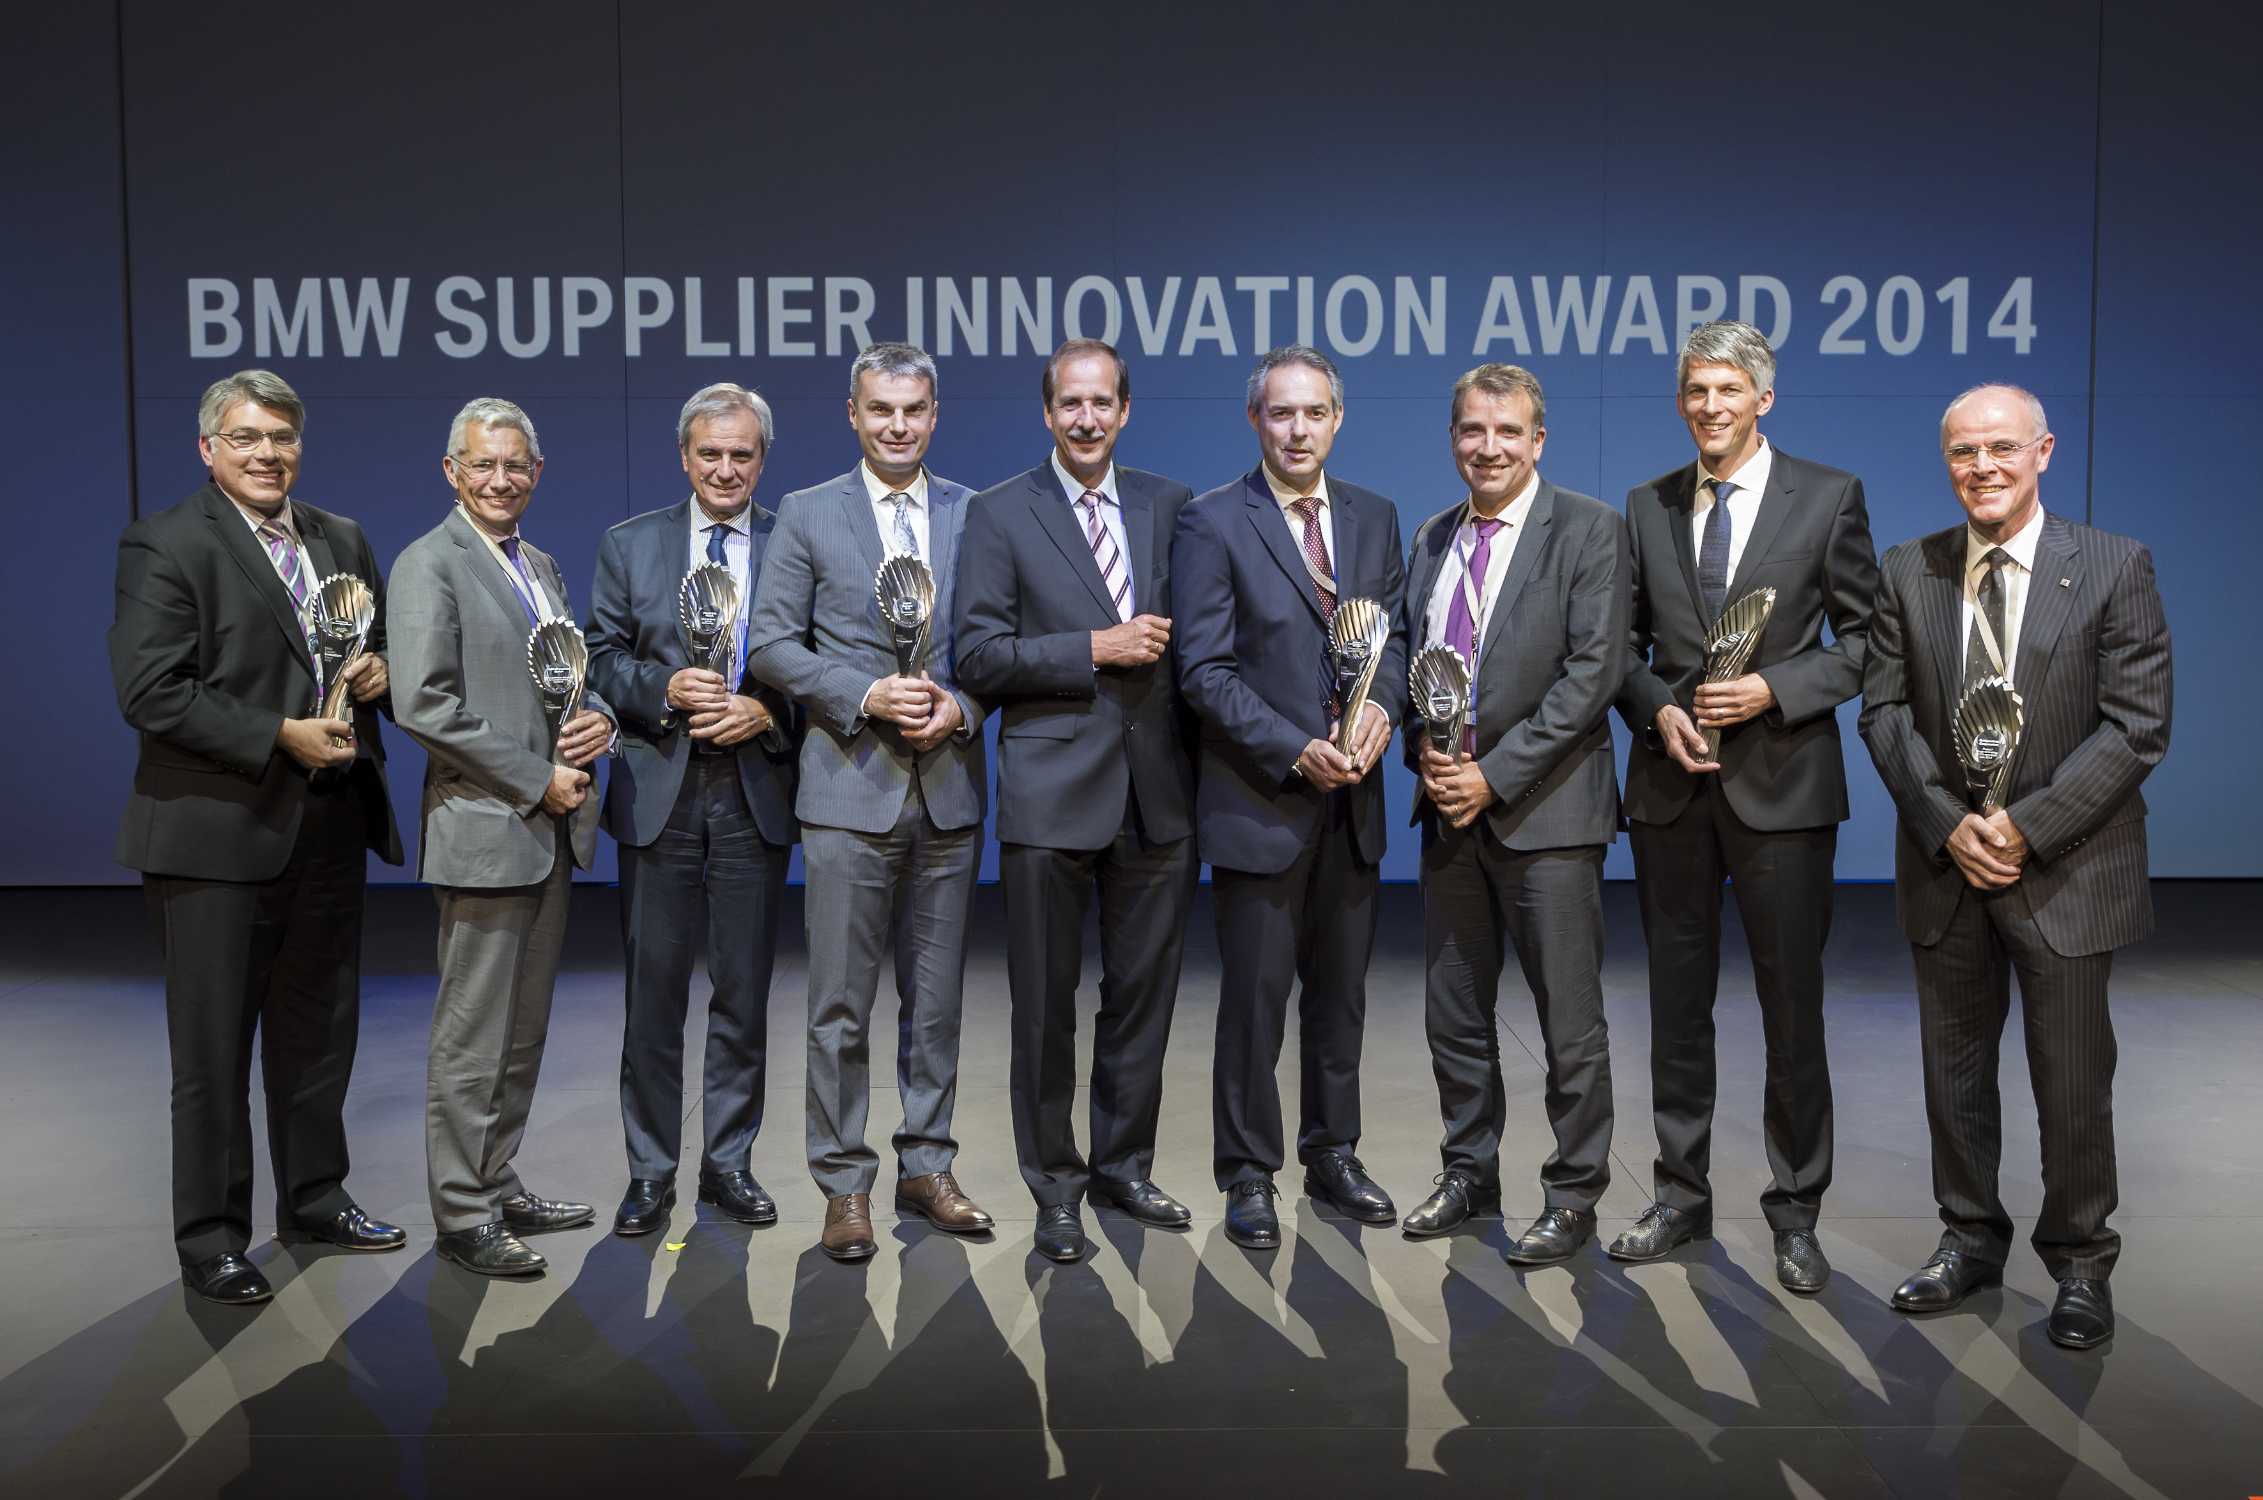 BMW Group recognises suppliers for best innovations